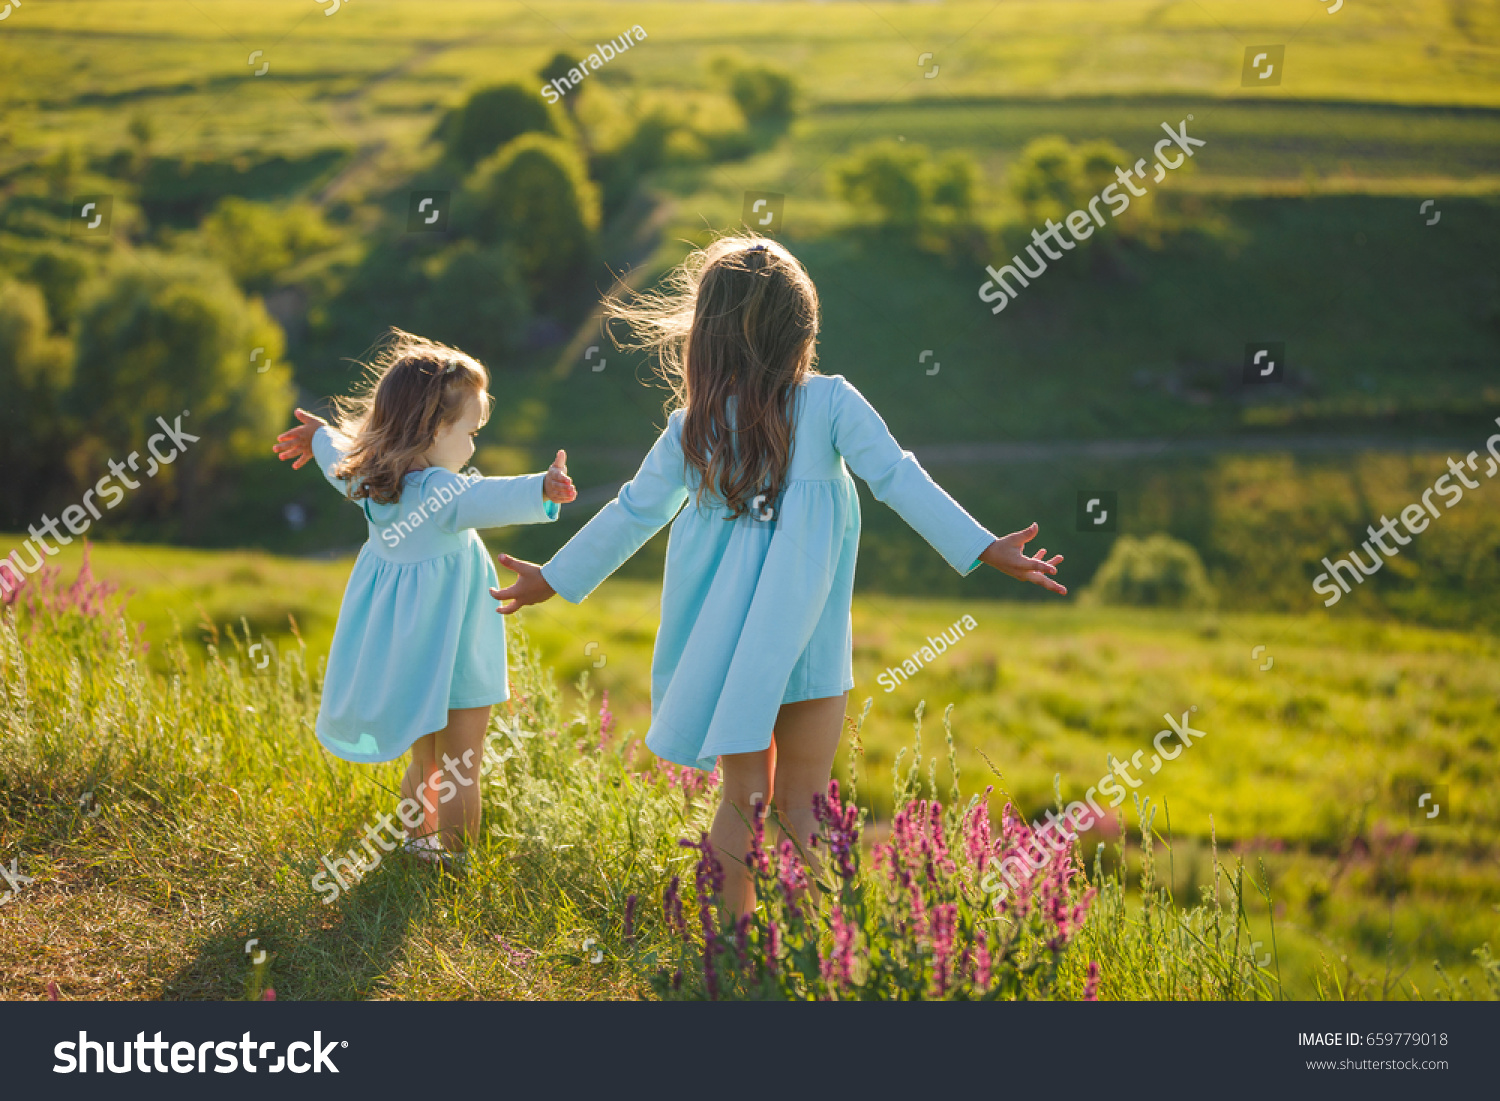 Little girl sisters. Freedom девочка. 2 Sisters outside. Teen outside playing.